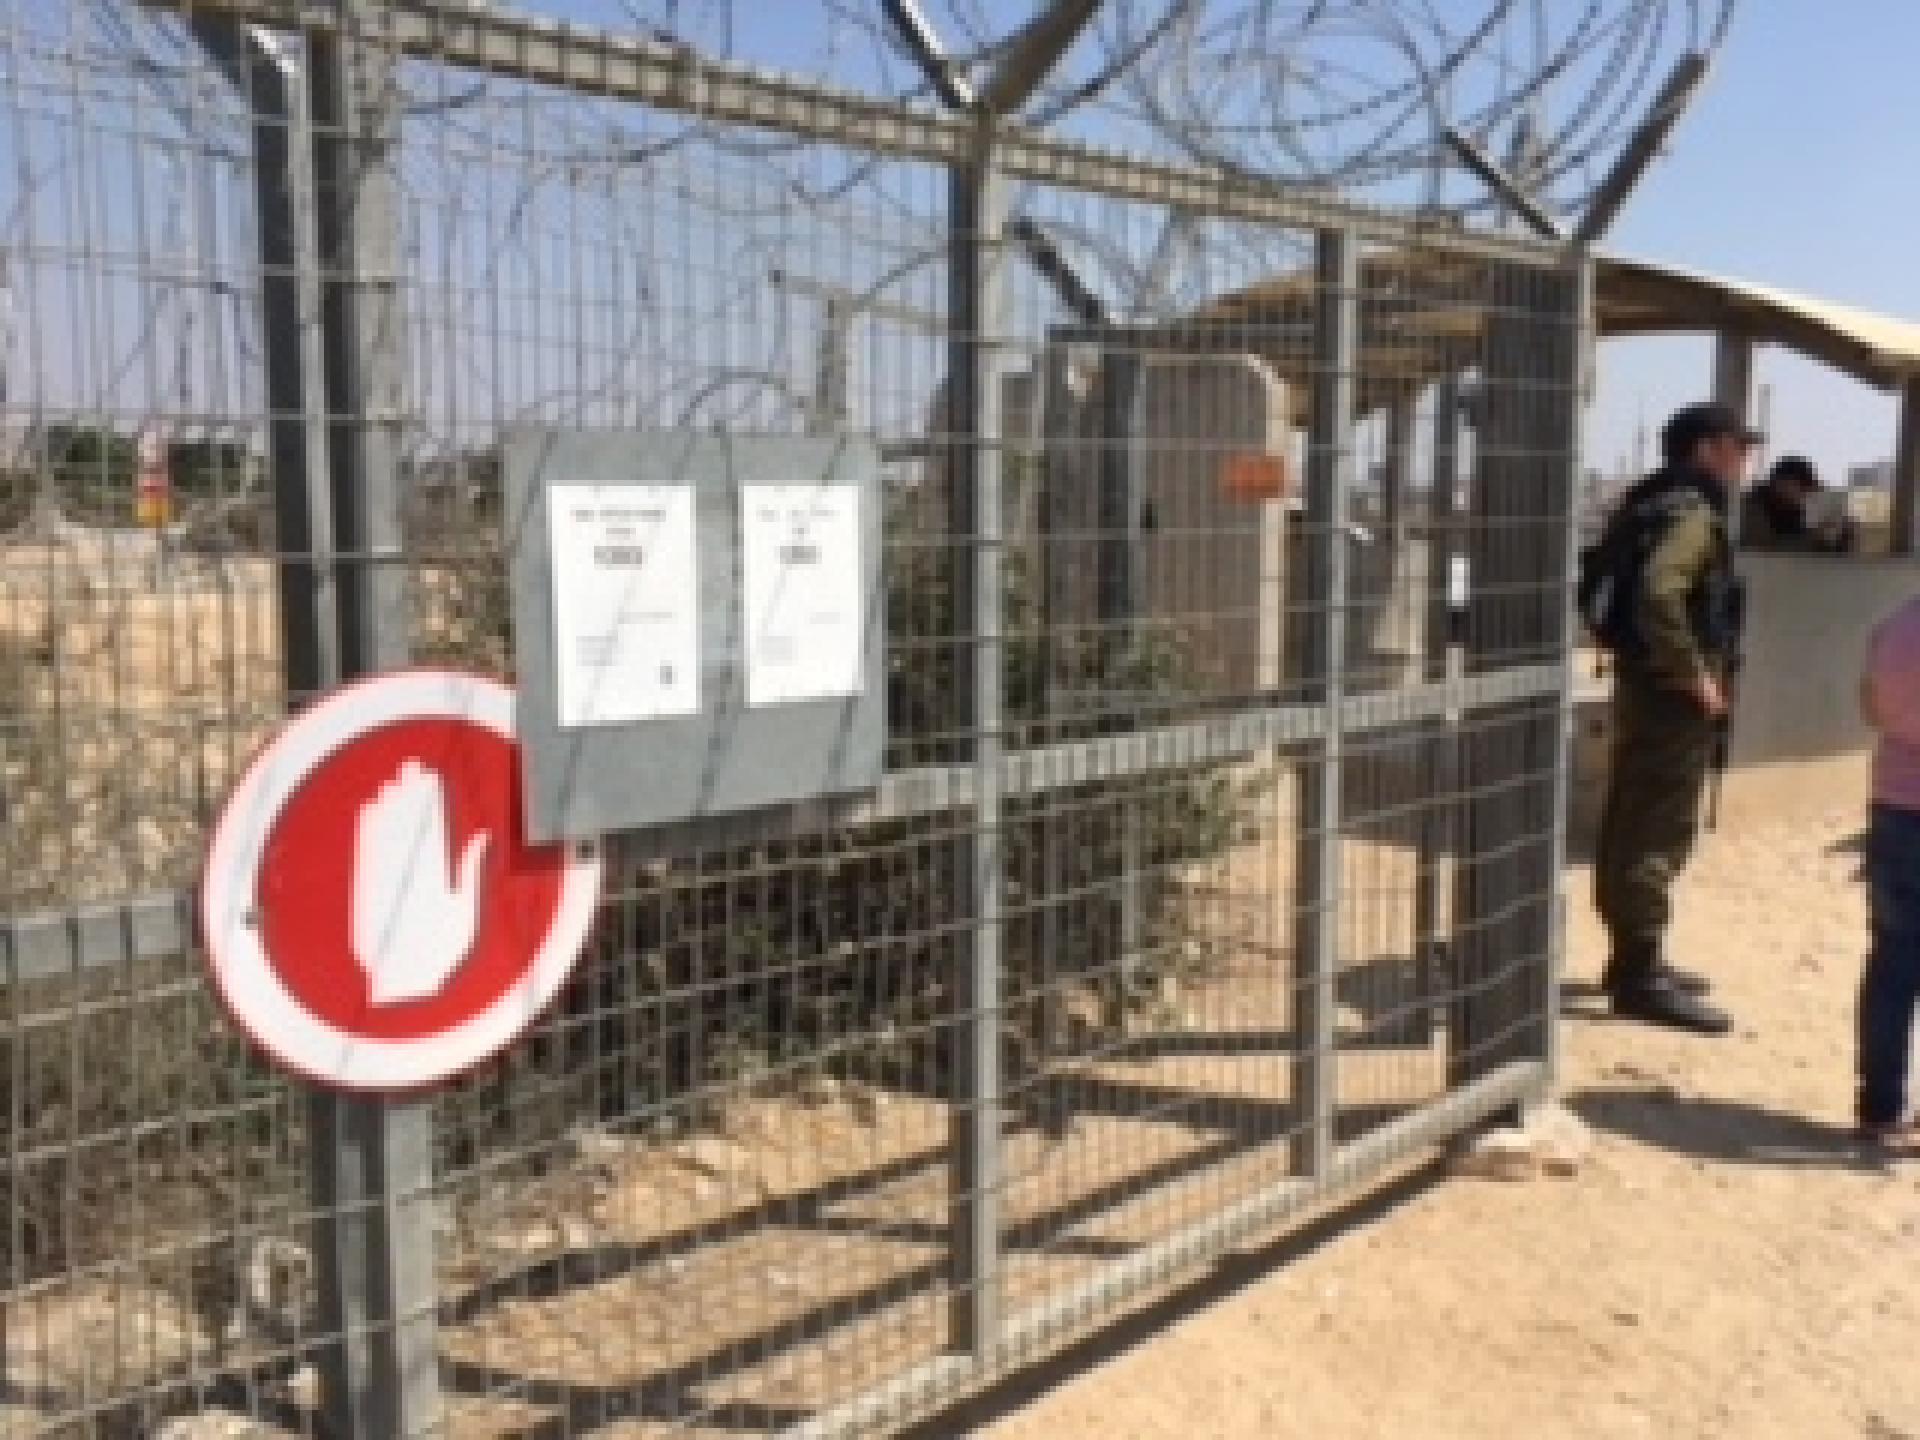 Habla - the sign is visible only when the checkpoint gates are open